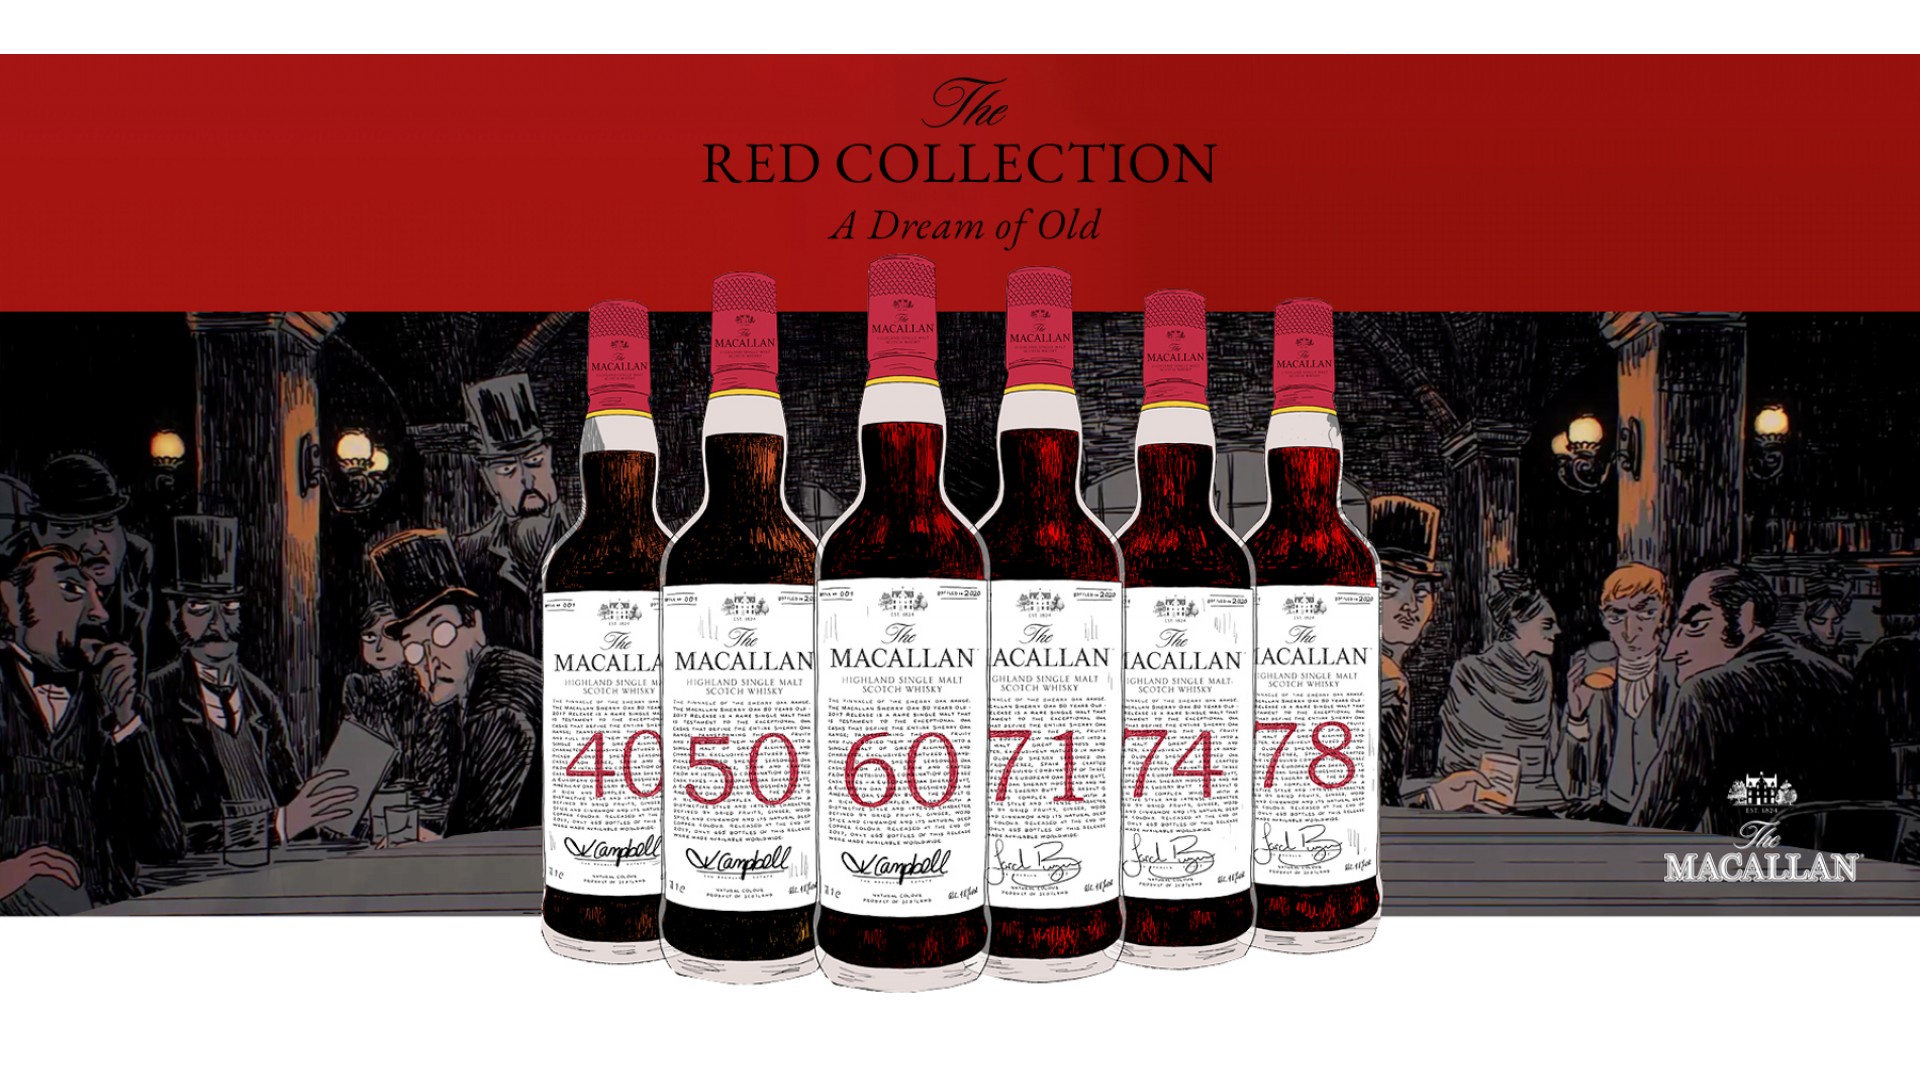 Macallan Red Collection